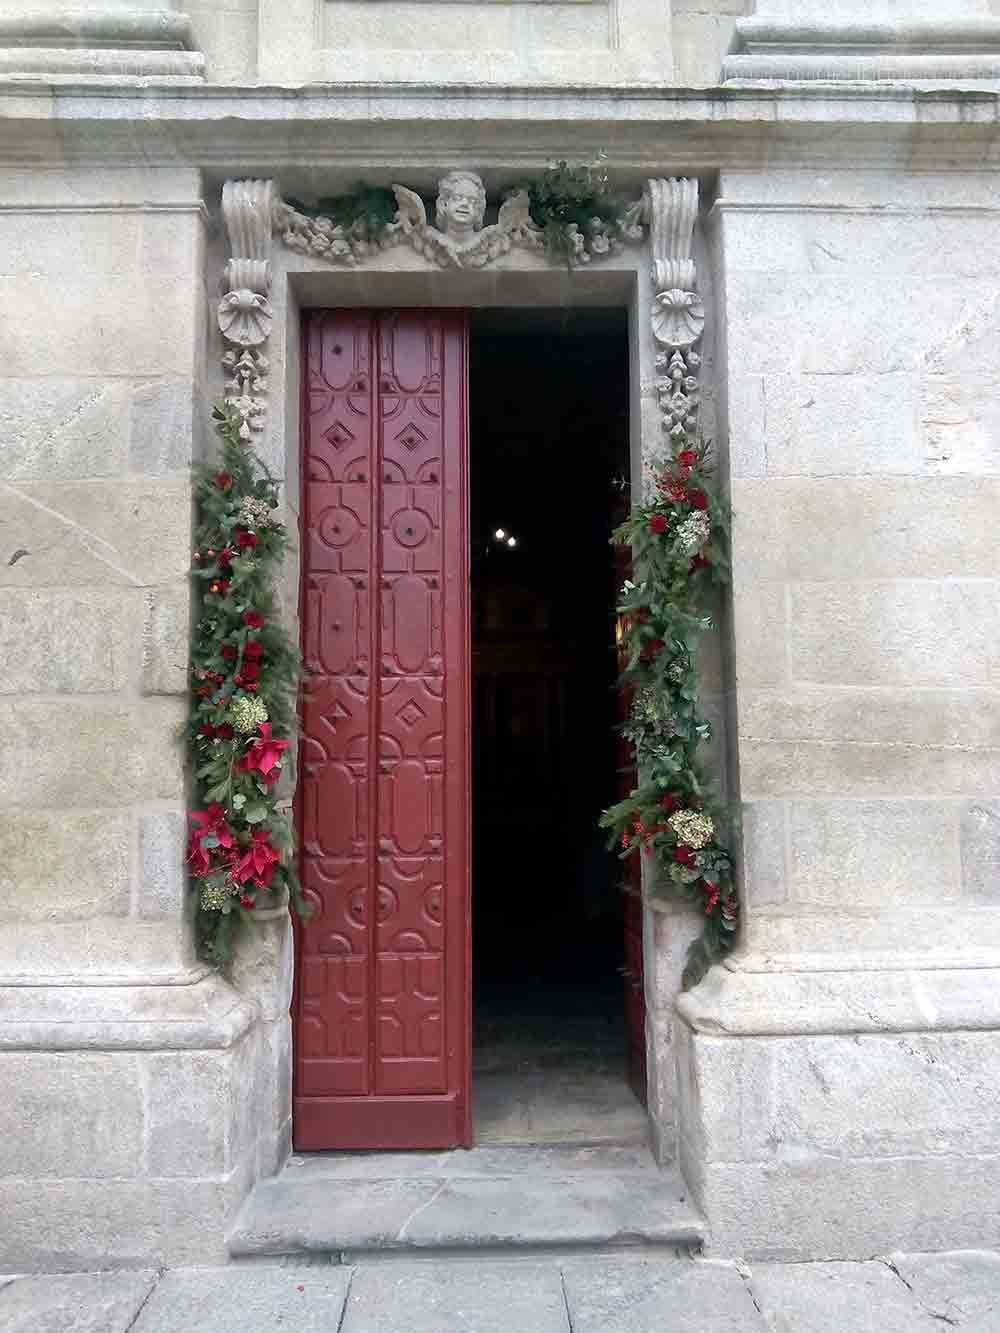 Holy Door of Mercy of the Cathedral of Lugo